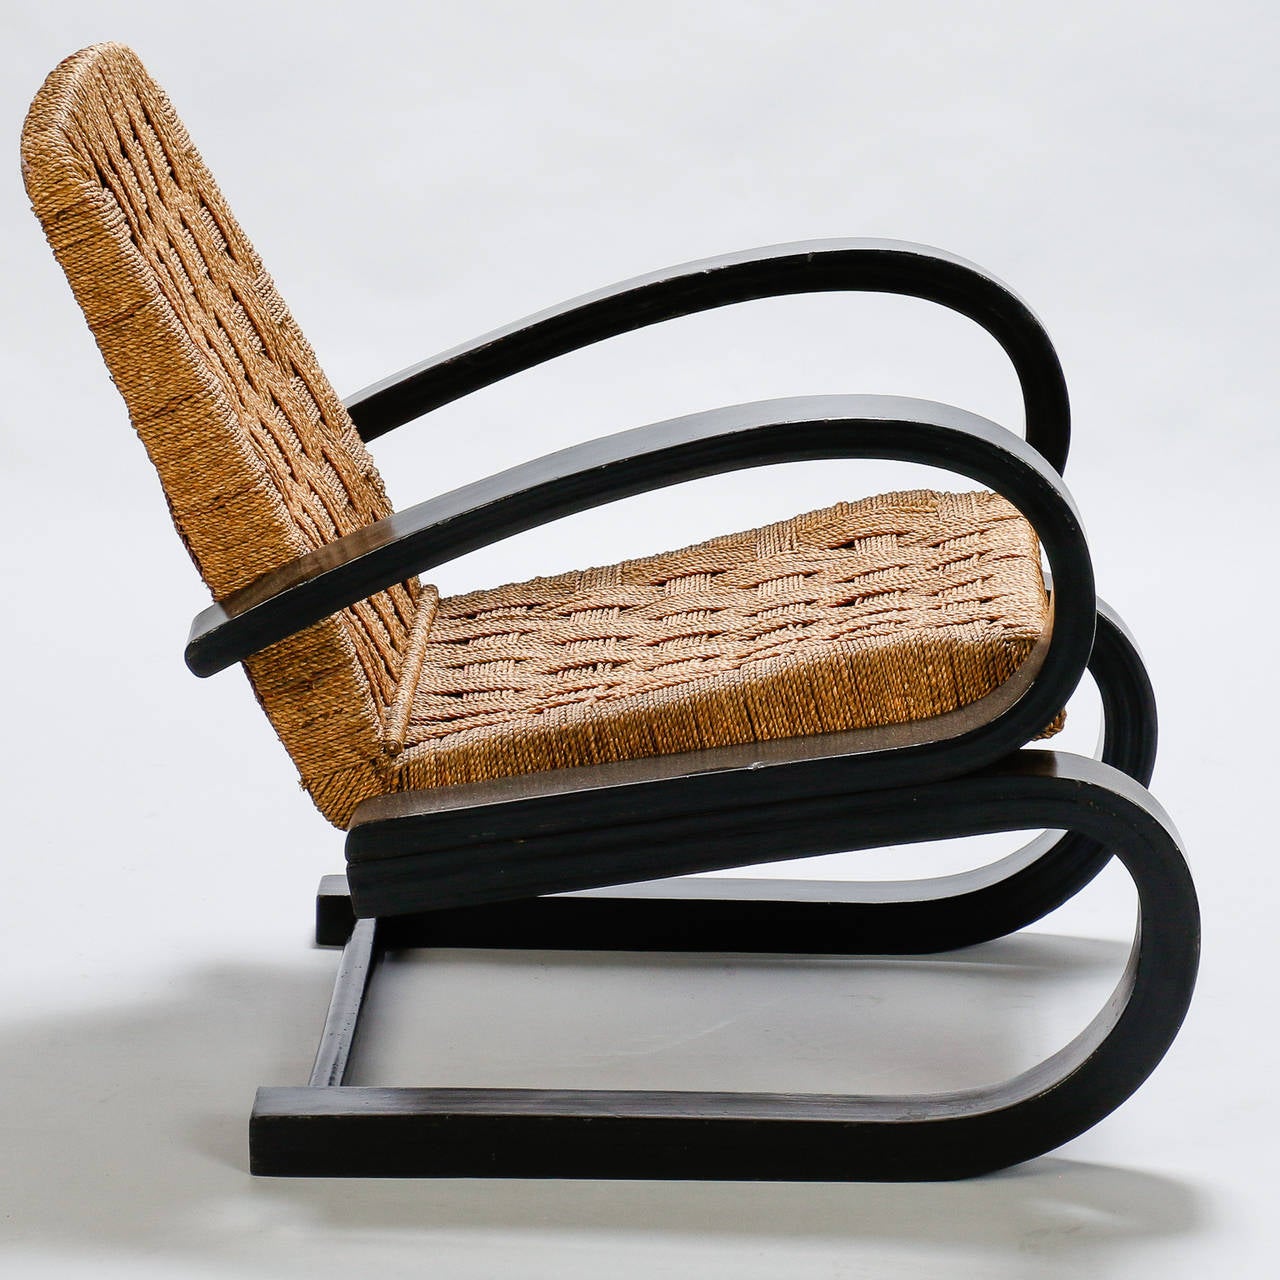 Armchair found in Italy with double form dark bent wood arms and woven rush seat and back in the manner of Audoux Minet, circa 1950s.  Seat is 16.5” high and 19.5” deep. Arms are 23.75